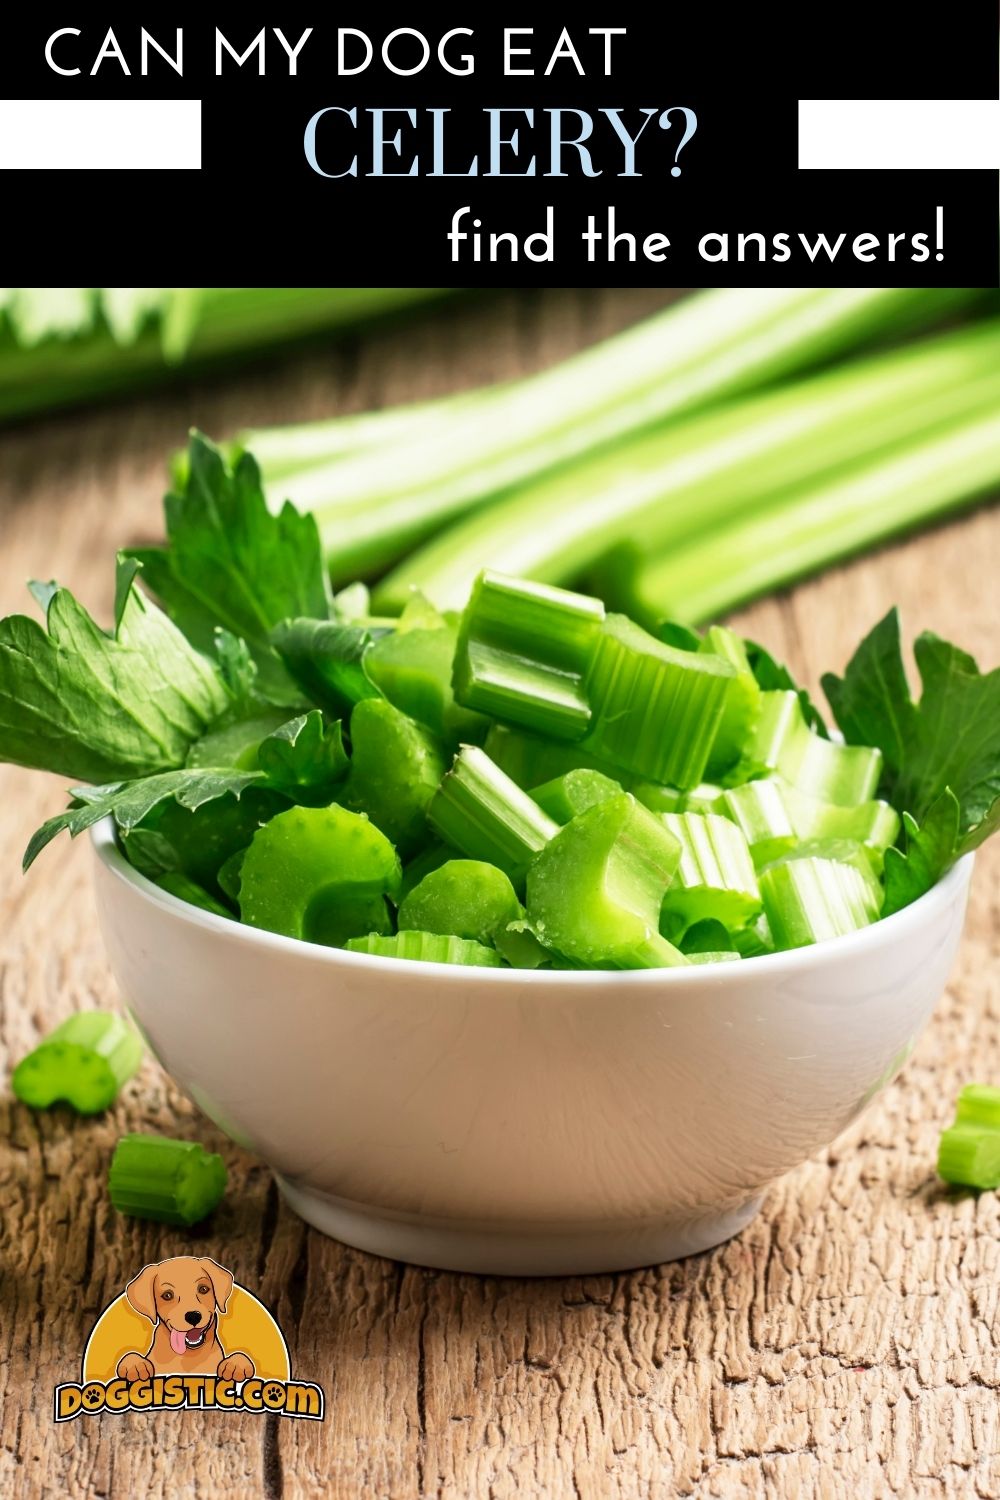 Image showing celery with text for can my dog eat celery.